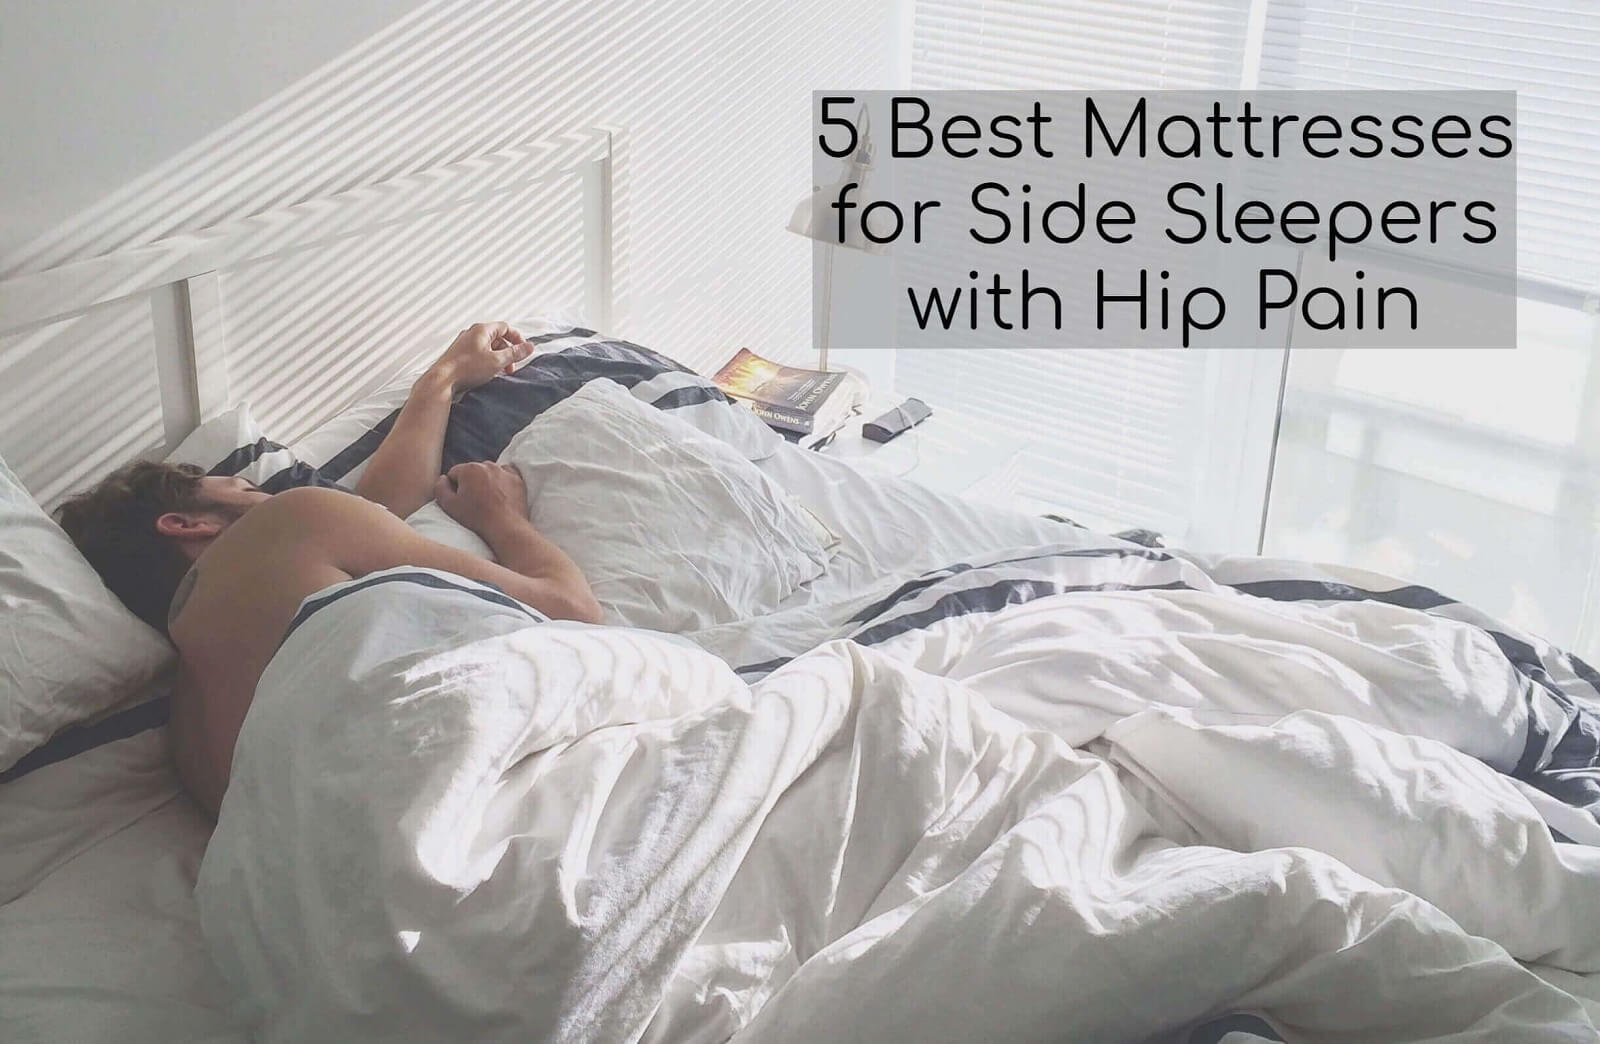 can soft mattresses cause back pain